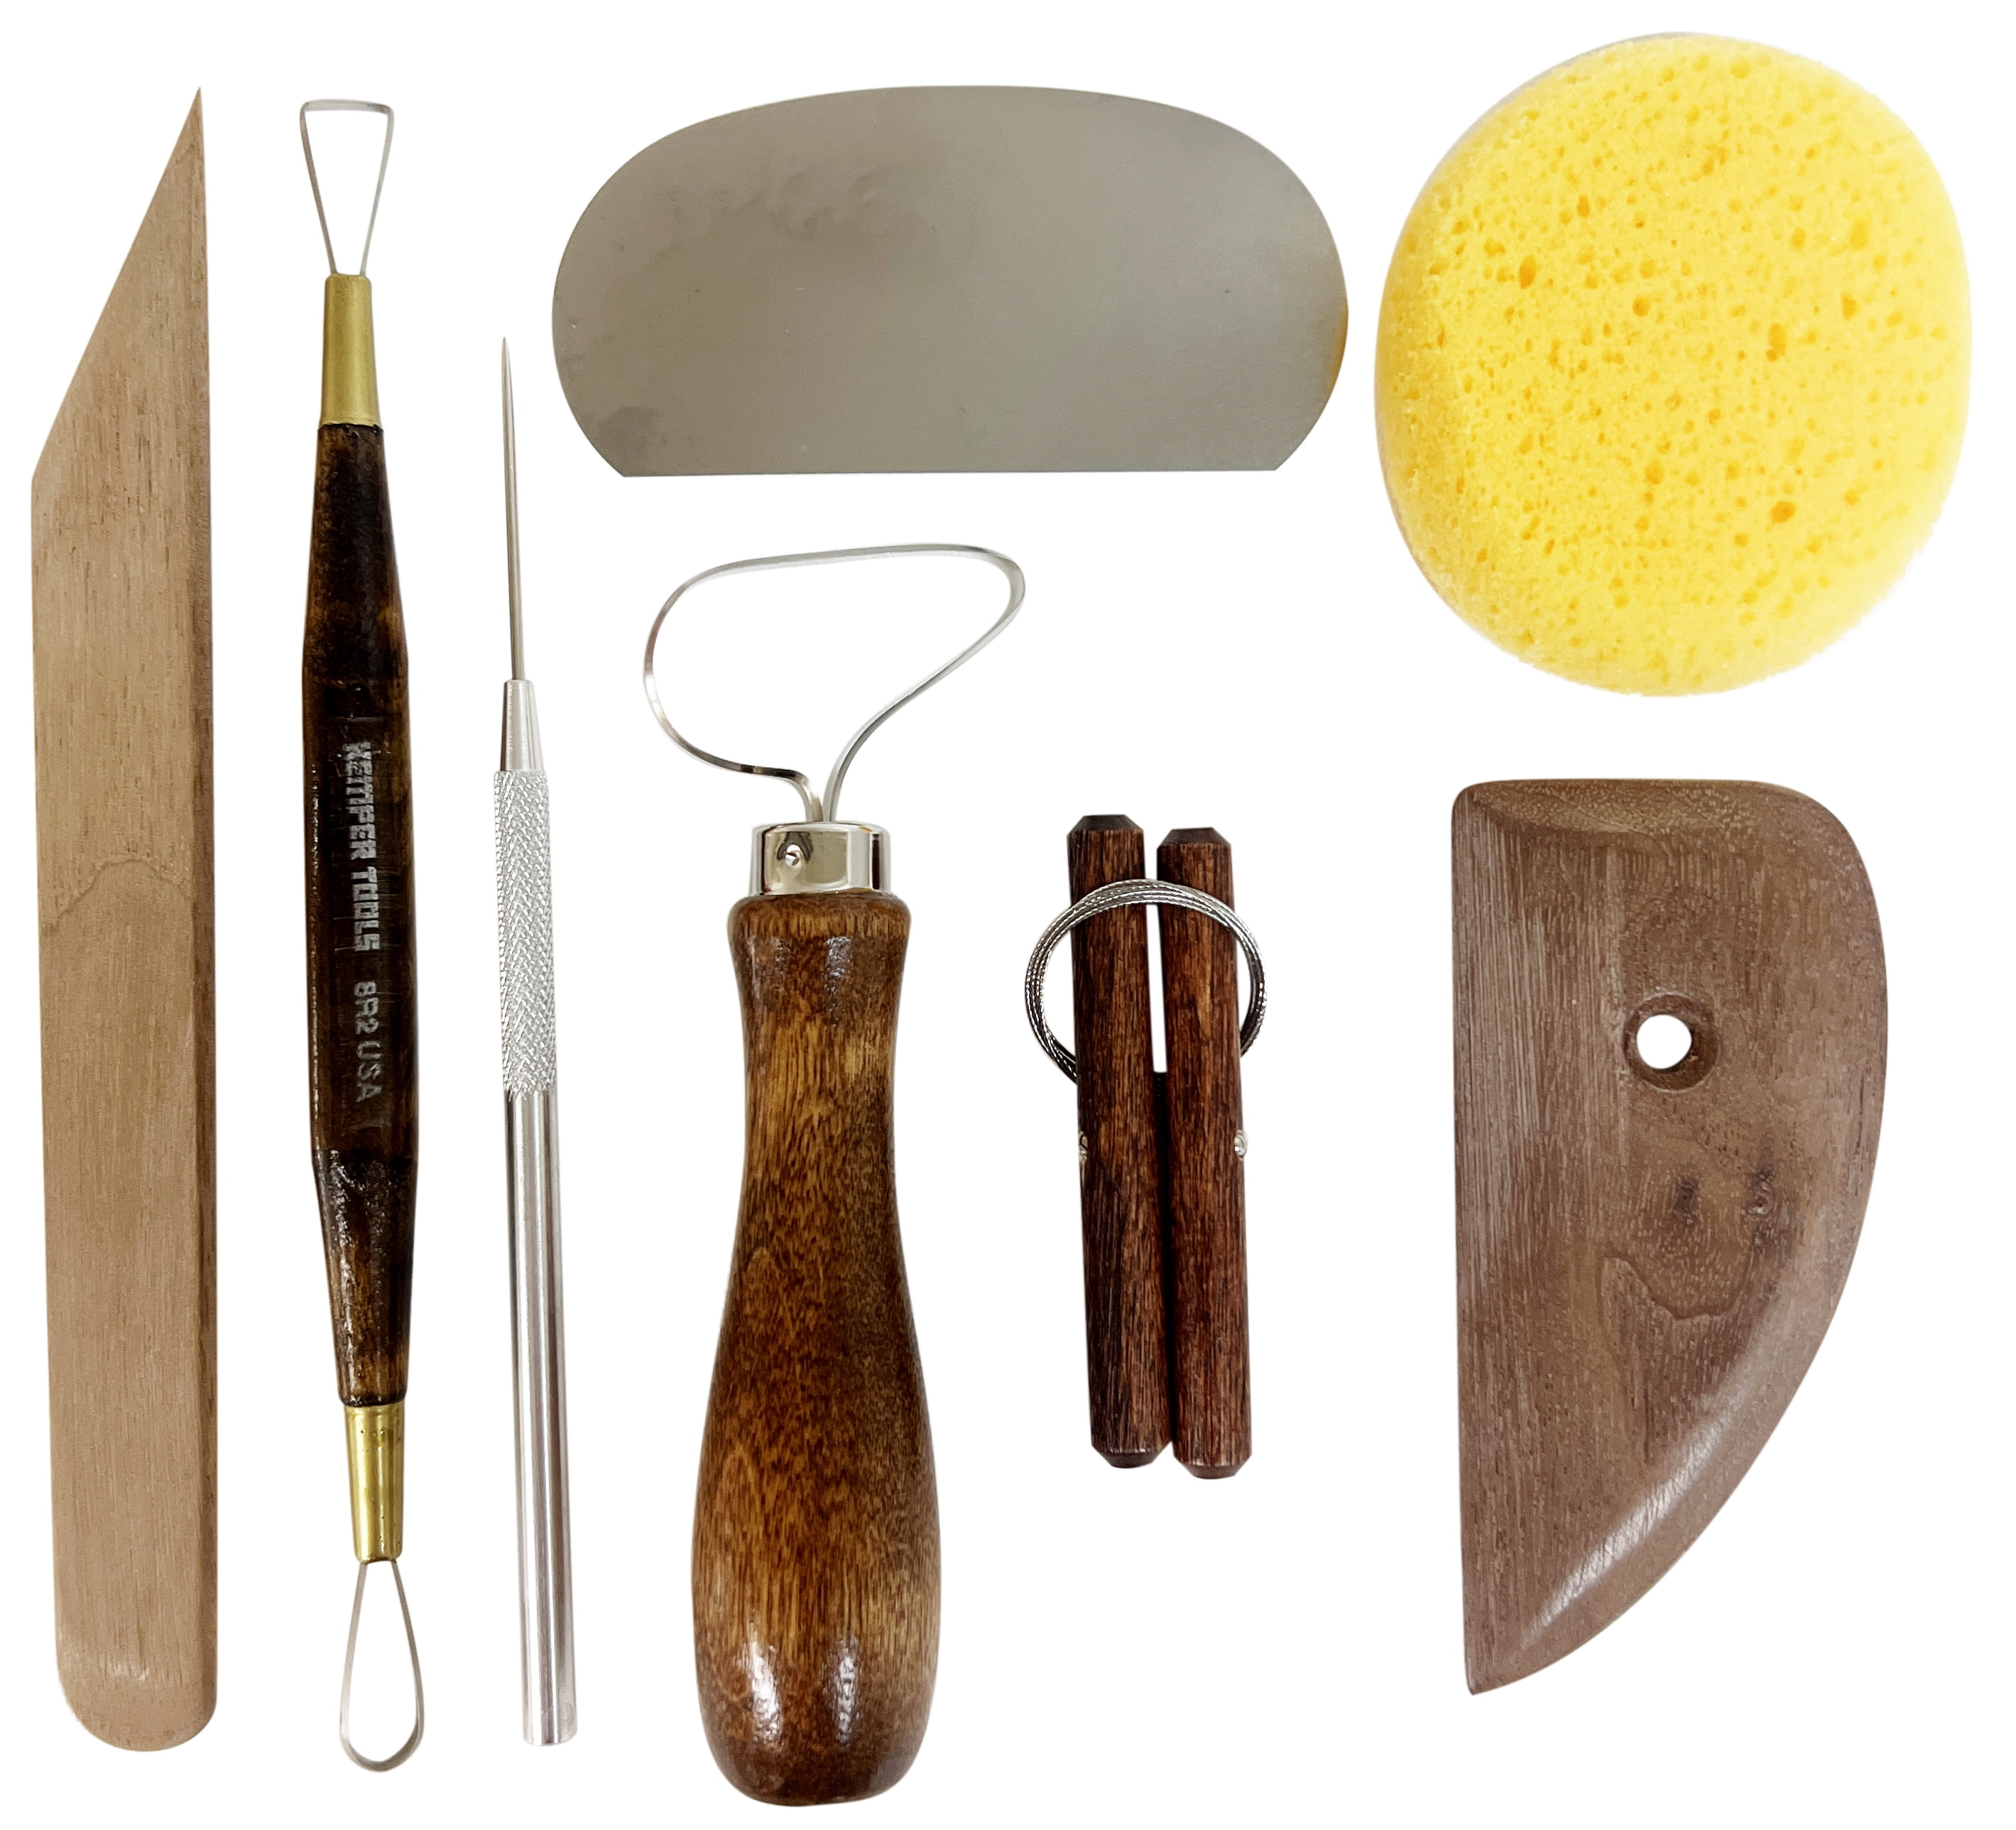 National Artcraft Potter's Tool Kit Contains 8 Essential Tools for  Trimming, Shaping and Smoothing Pottery and Ceramic Clay Surfaces